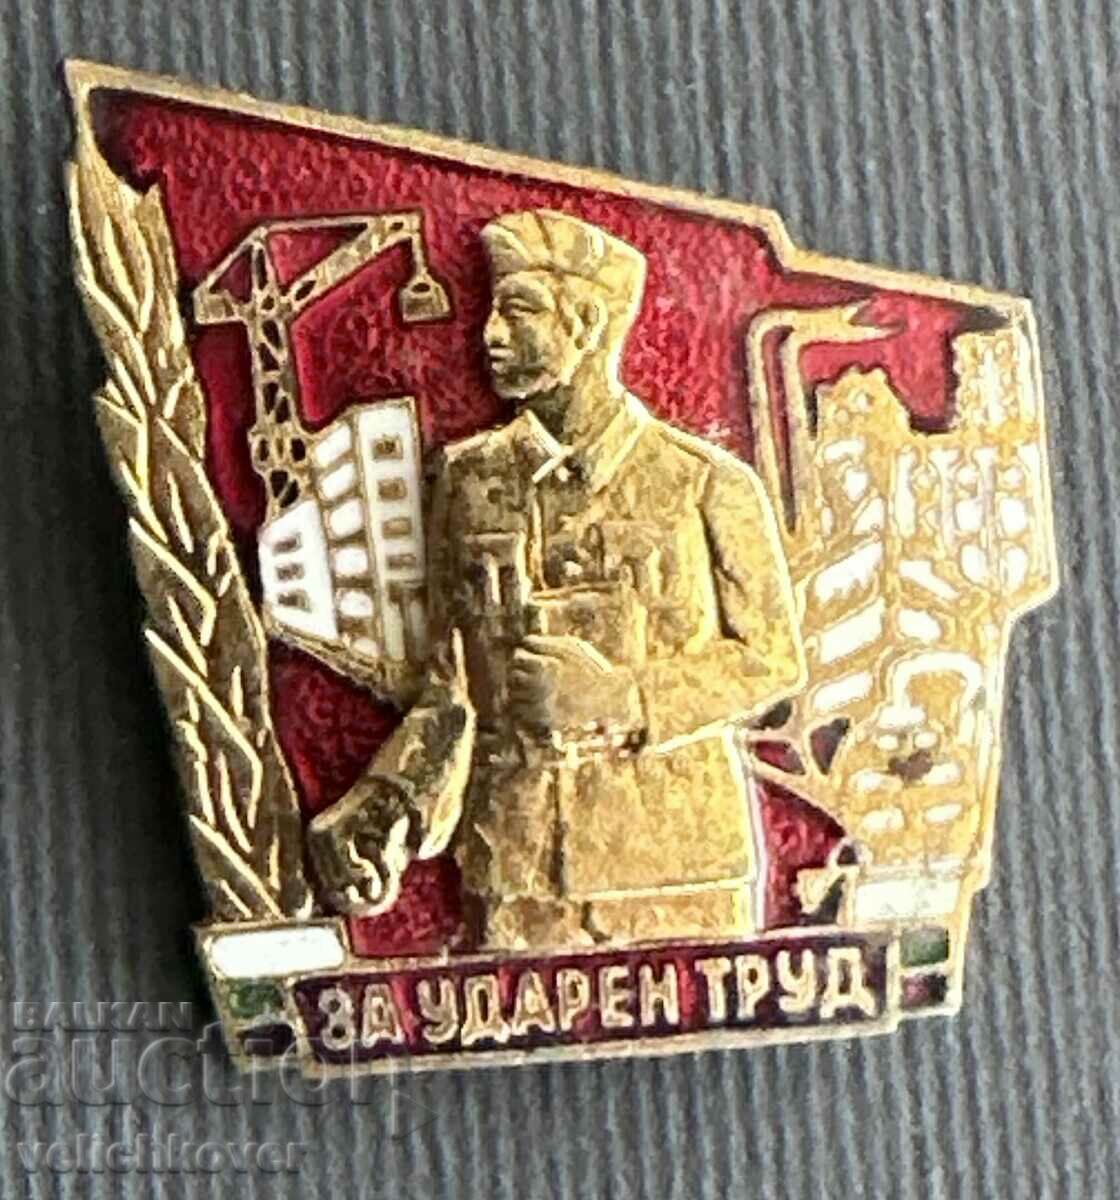 36247 Bulgaria military insignia Construction troops For Impact work